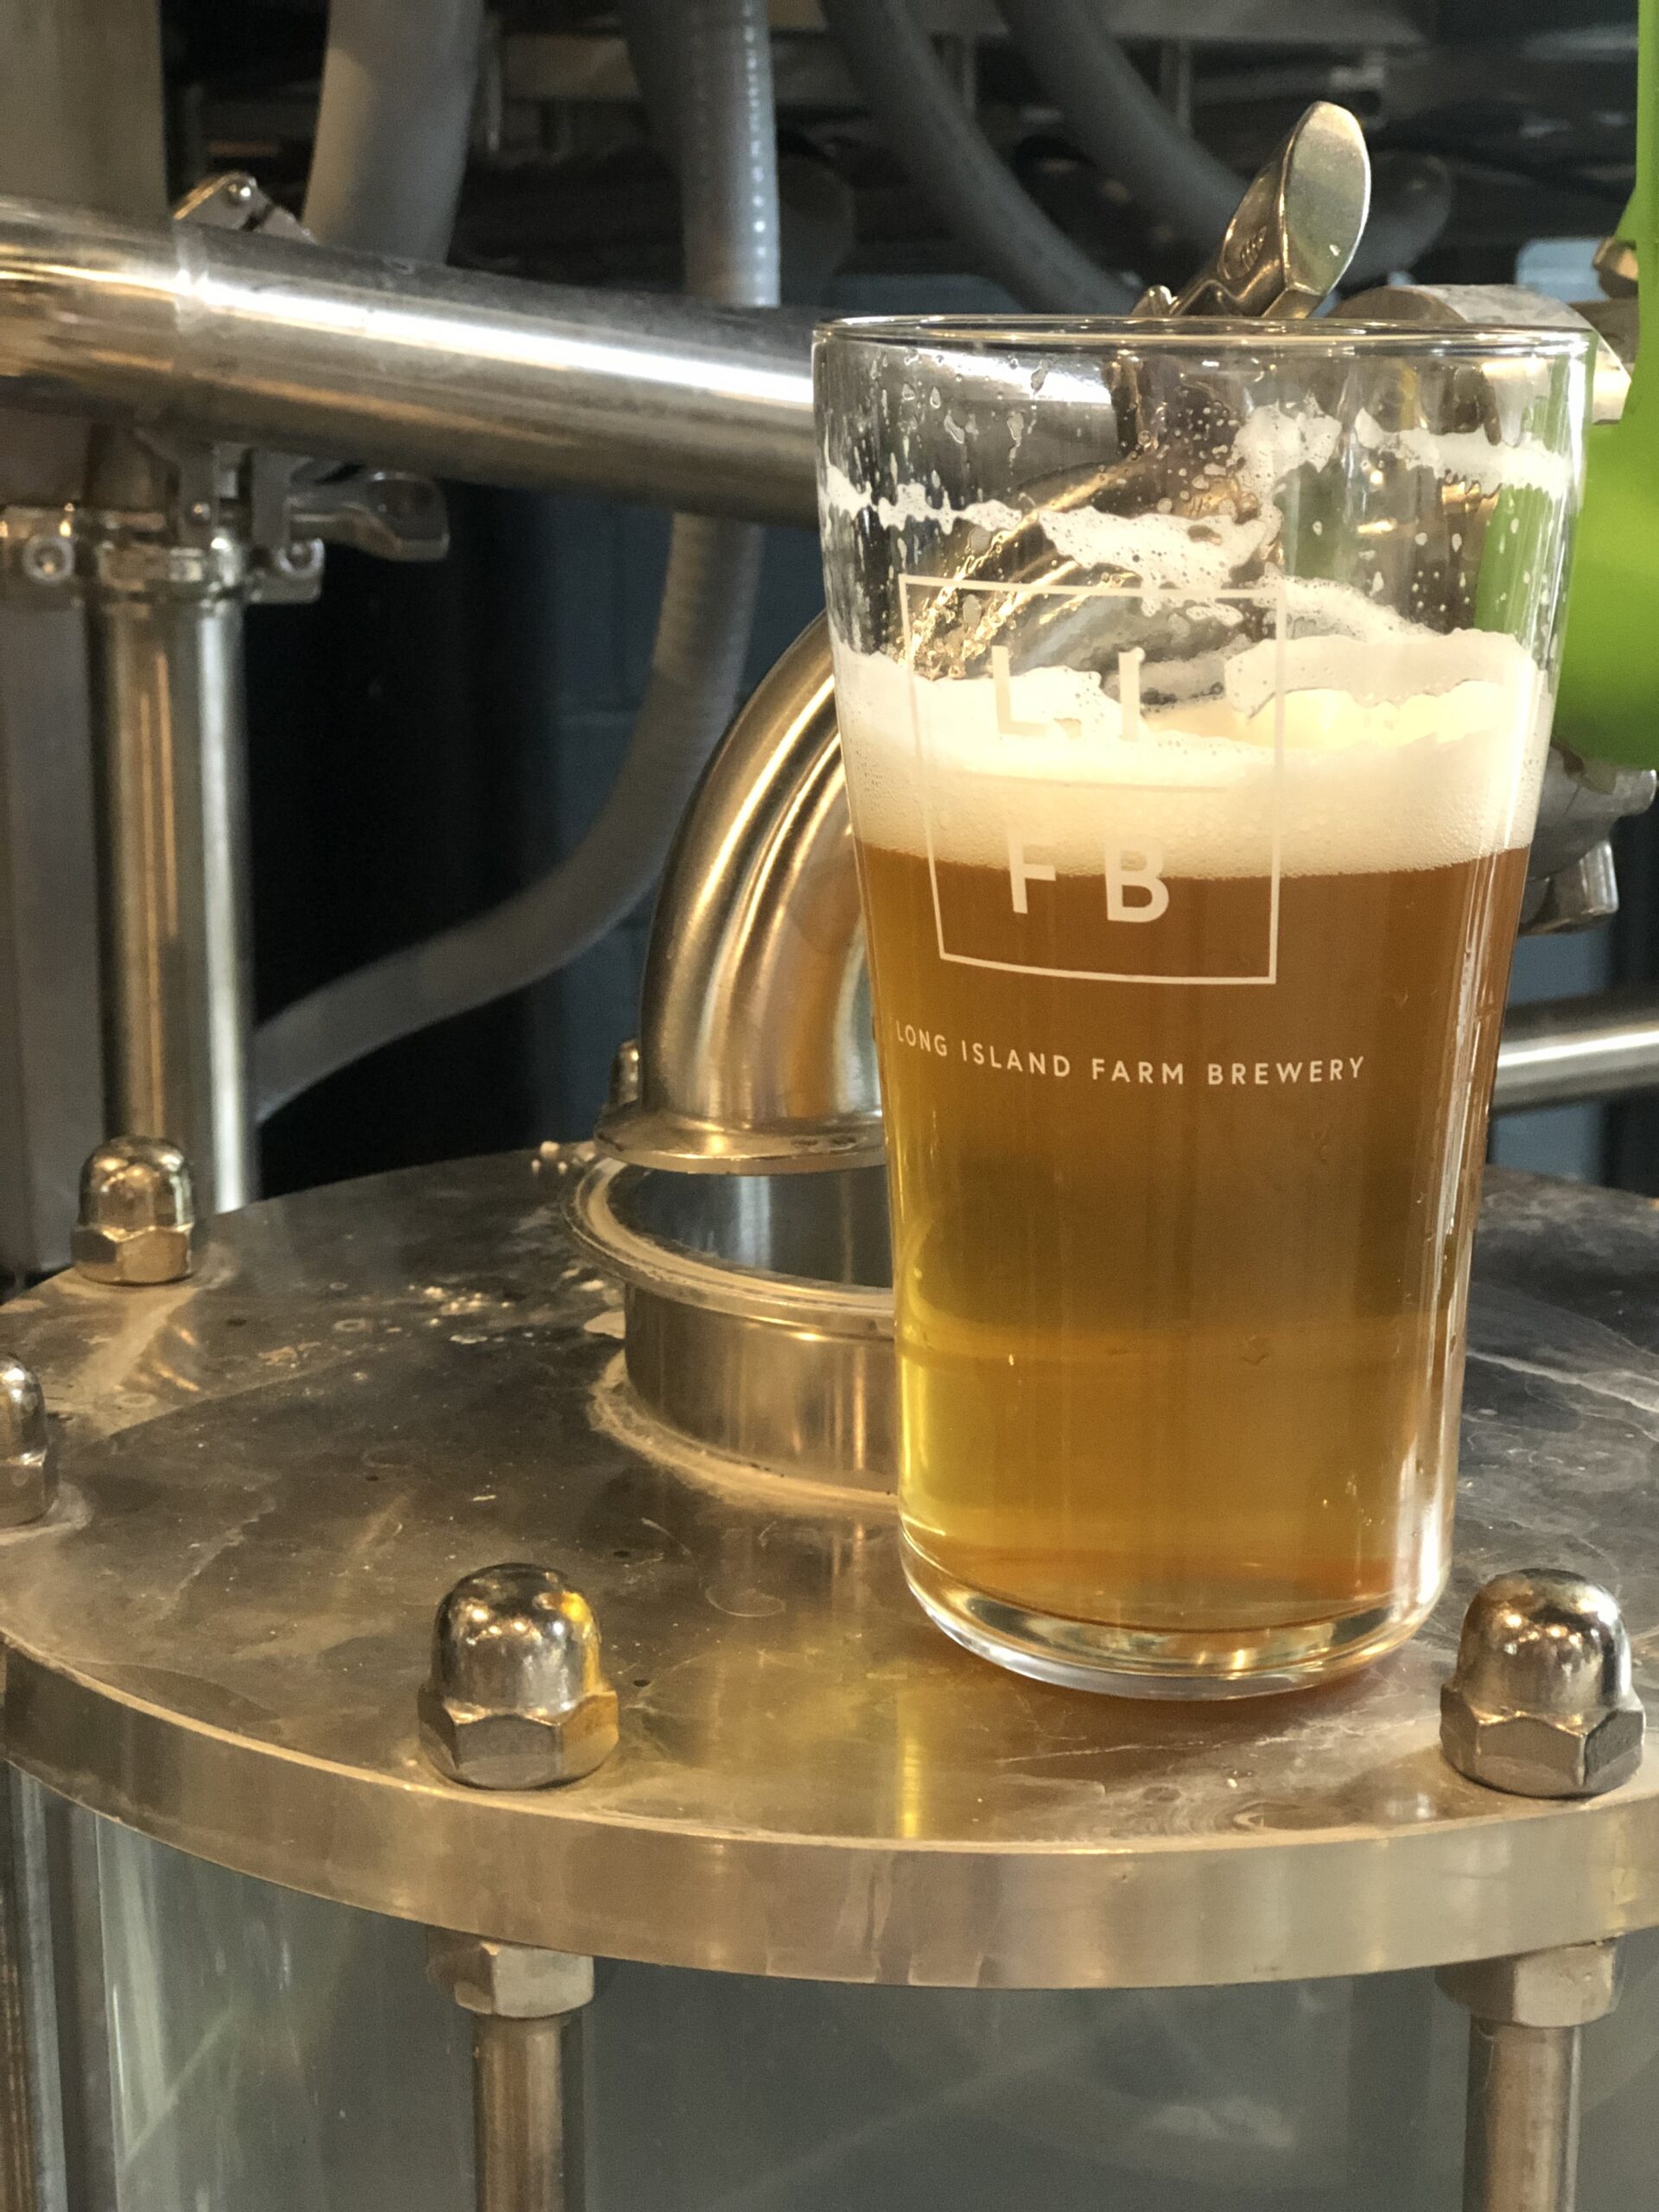 Tapping Into A New Trend: Breweries Are Popping Up Everywhere